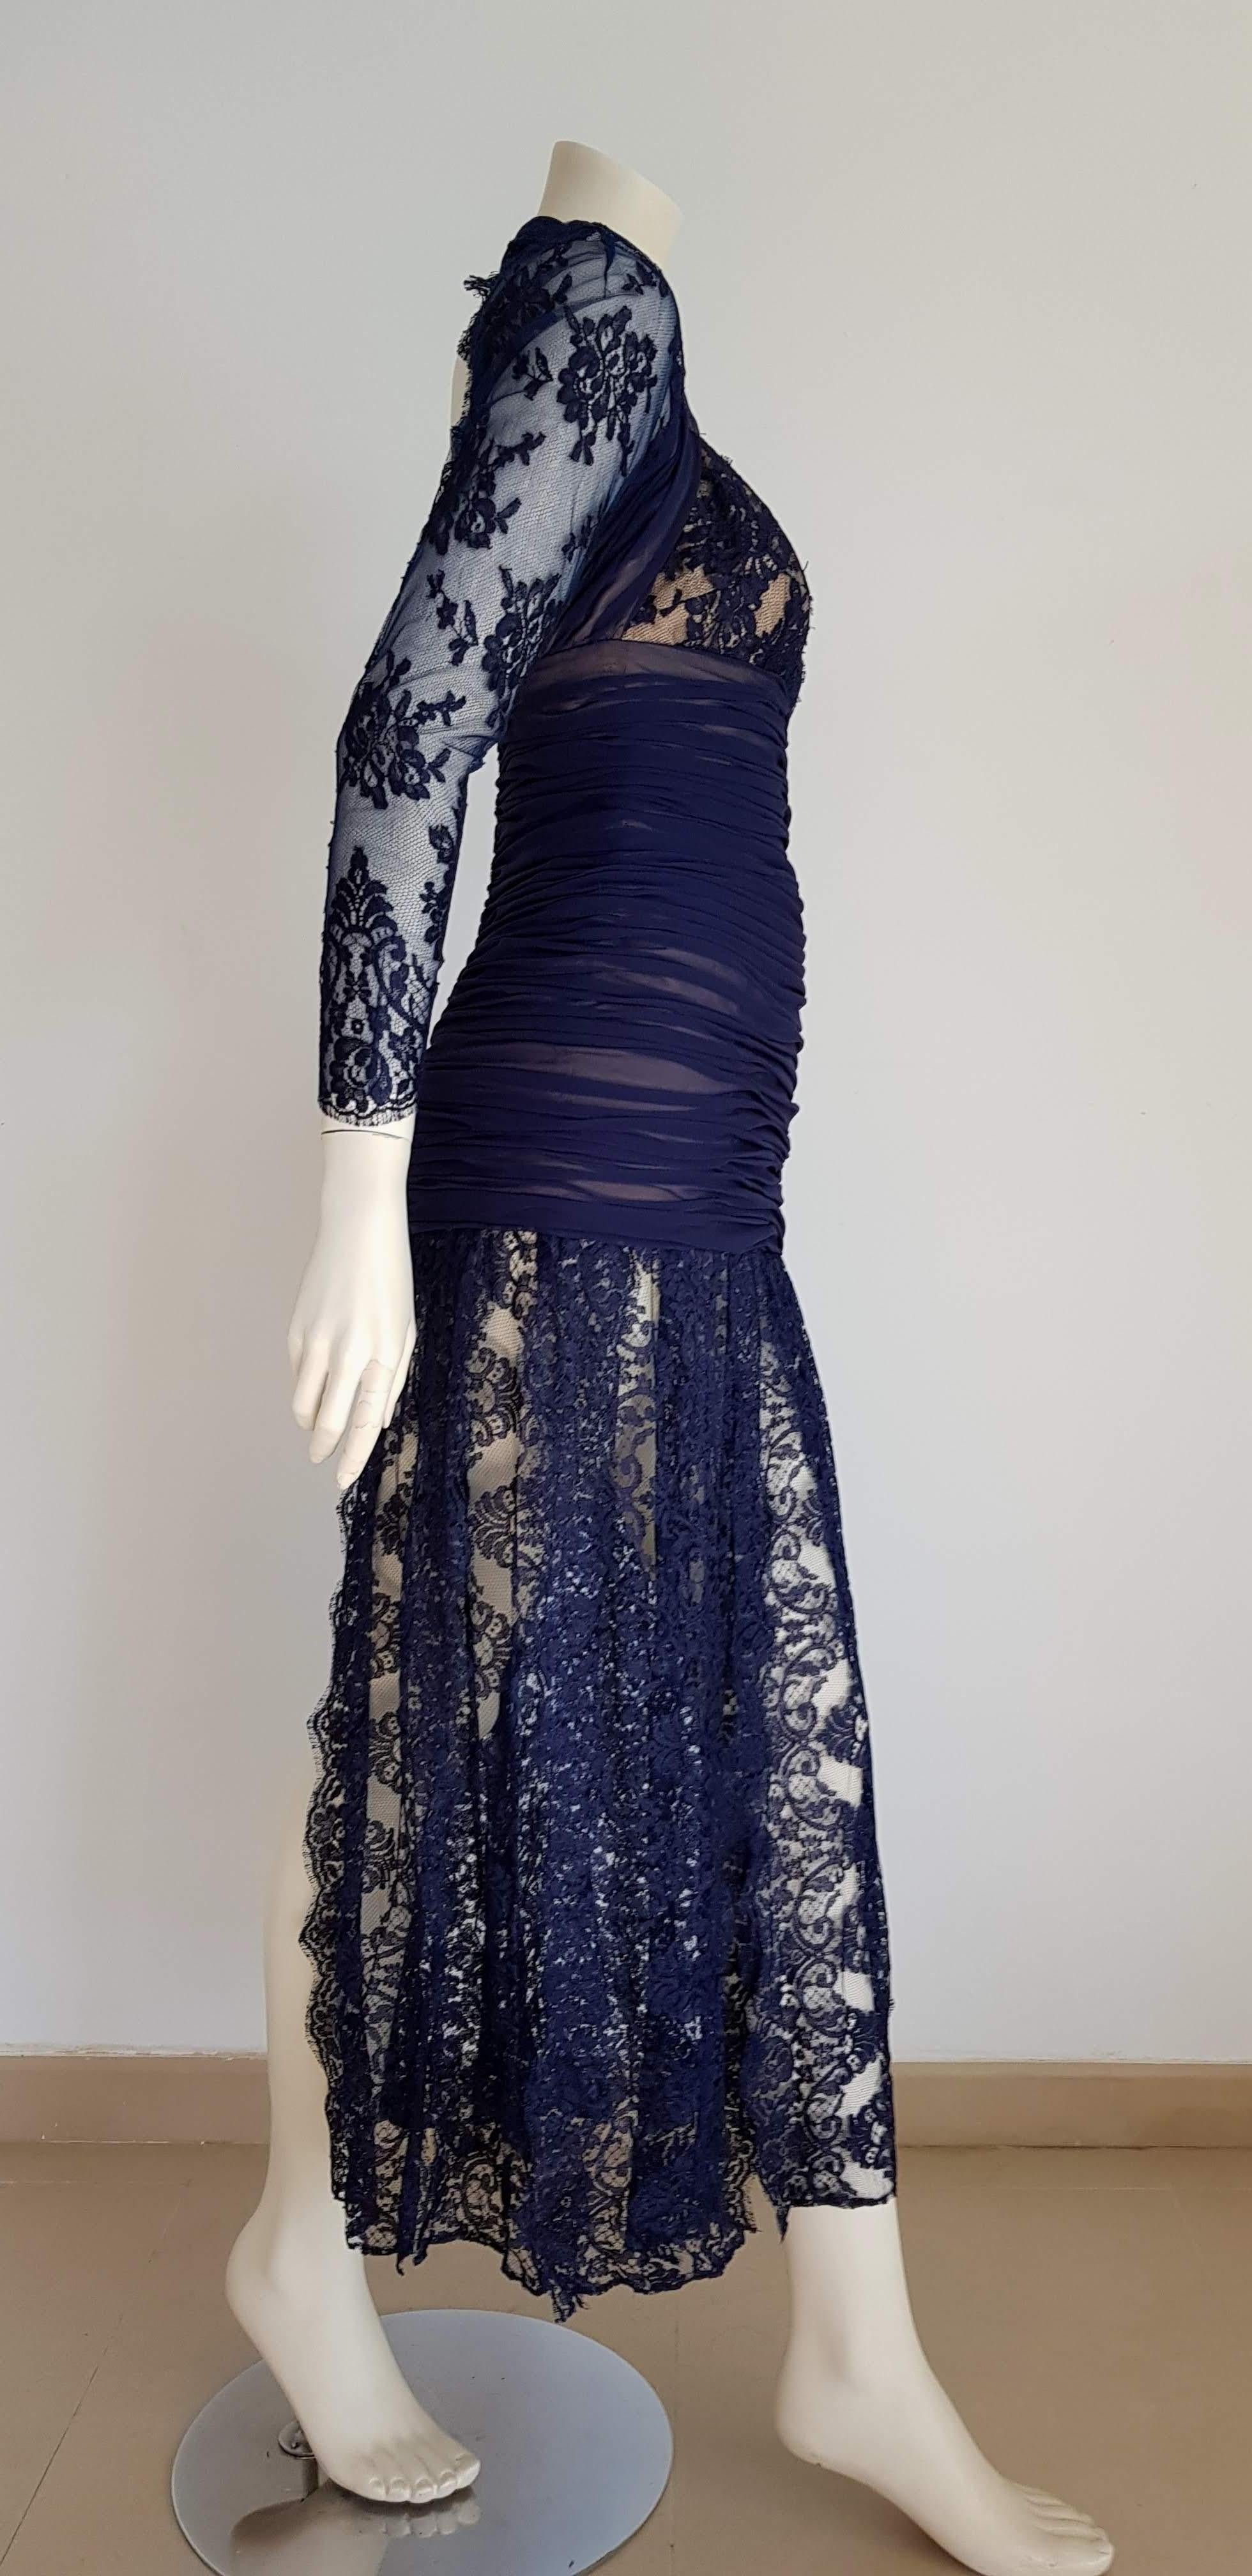 Isabelle ALLARD Paris, Couture, sleeves chest skirt lace, pleated silk waistband, blue silk cotton dress - Unworn, New.

Isabelle ALLARD is a Paris brand that created only haute couture and selling to international customers too. It did not produce